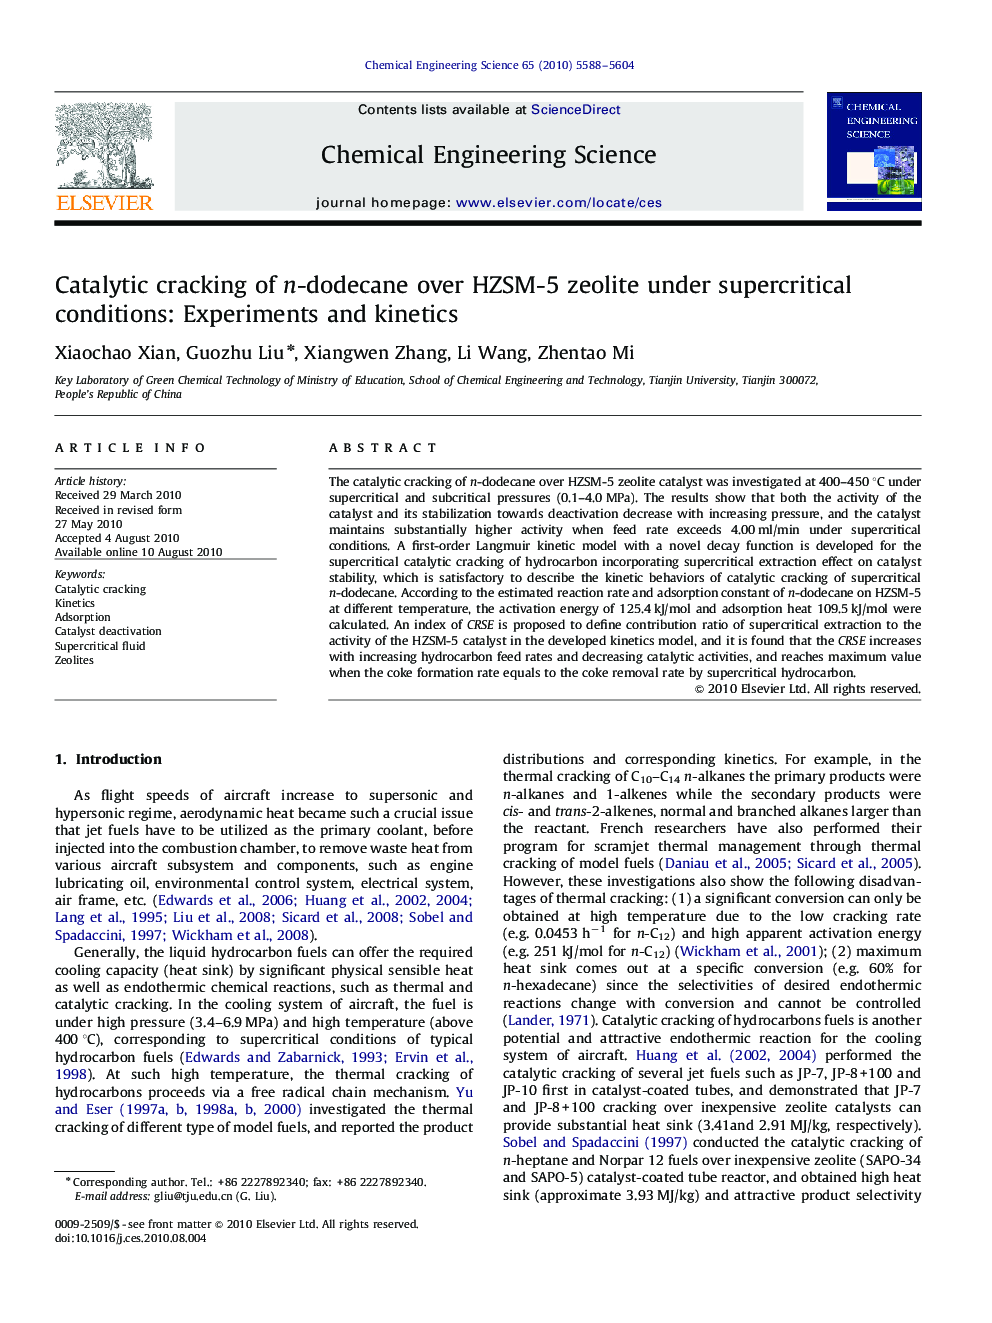 Catalytic cracking of n-dodecane over HZSM-5 zeolite under supercritical conditions: Experiments and kinetics